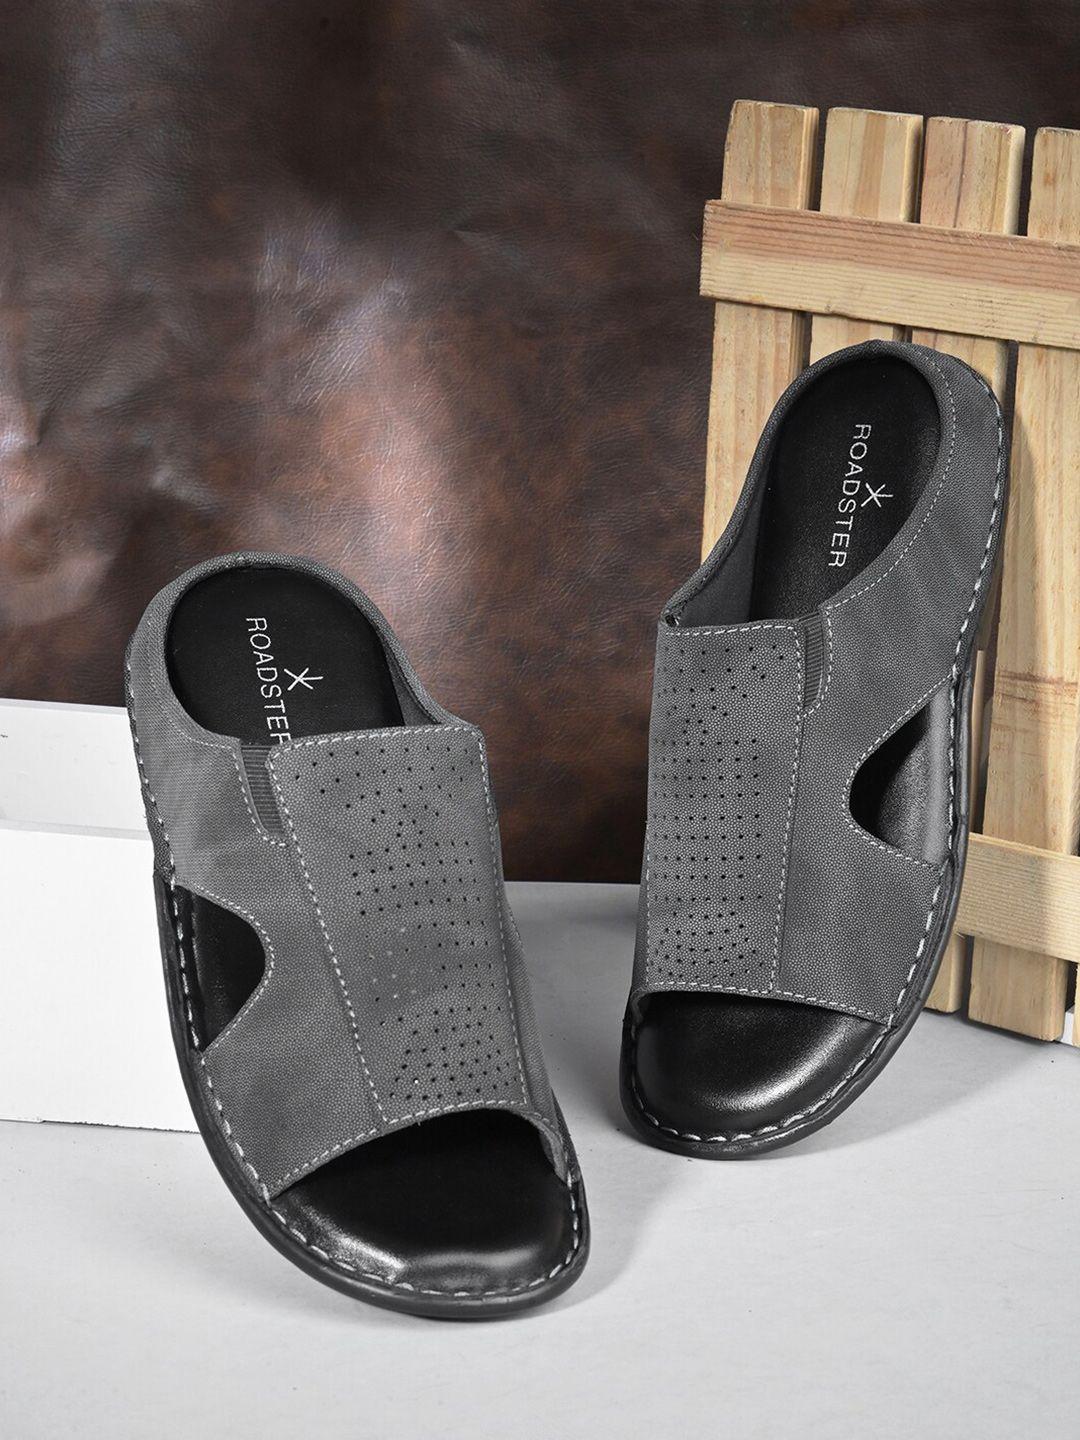 the roadster lifestyle co. men textured sleek silhouette slip on casual comfort sandals